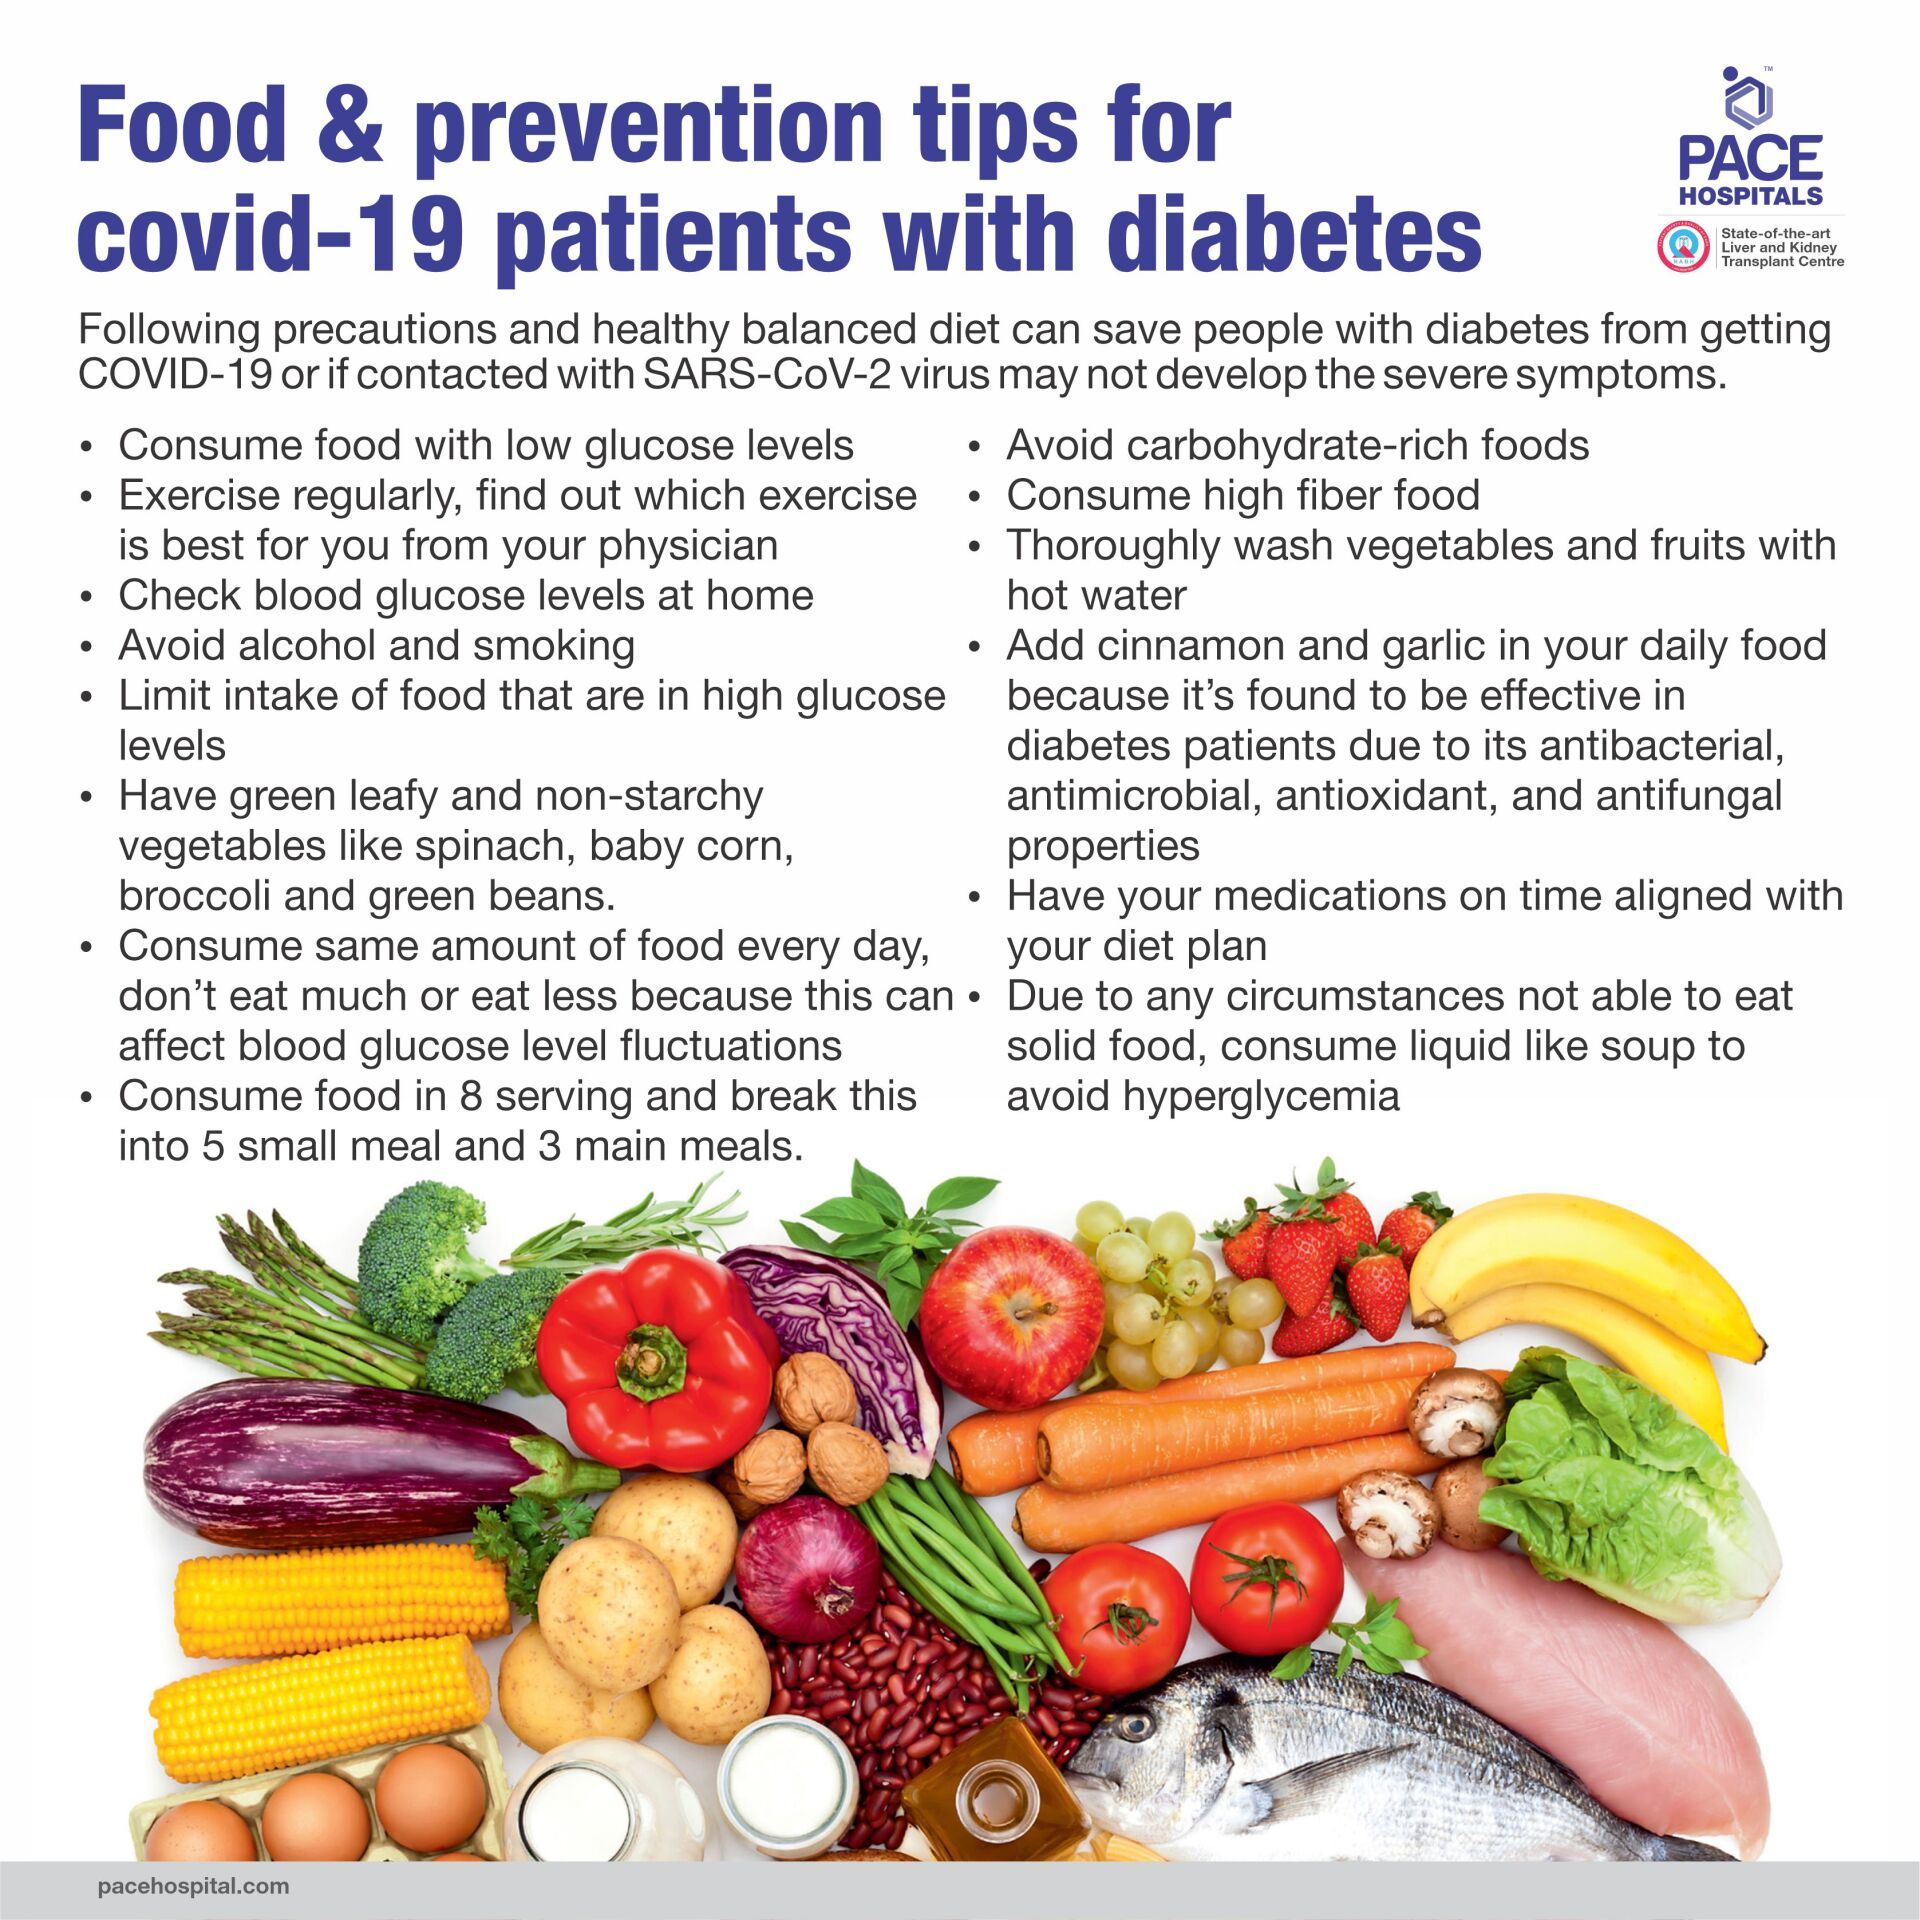 Food & prevention tips. Diet plan covid-19 patients with diabetes